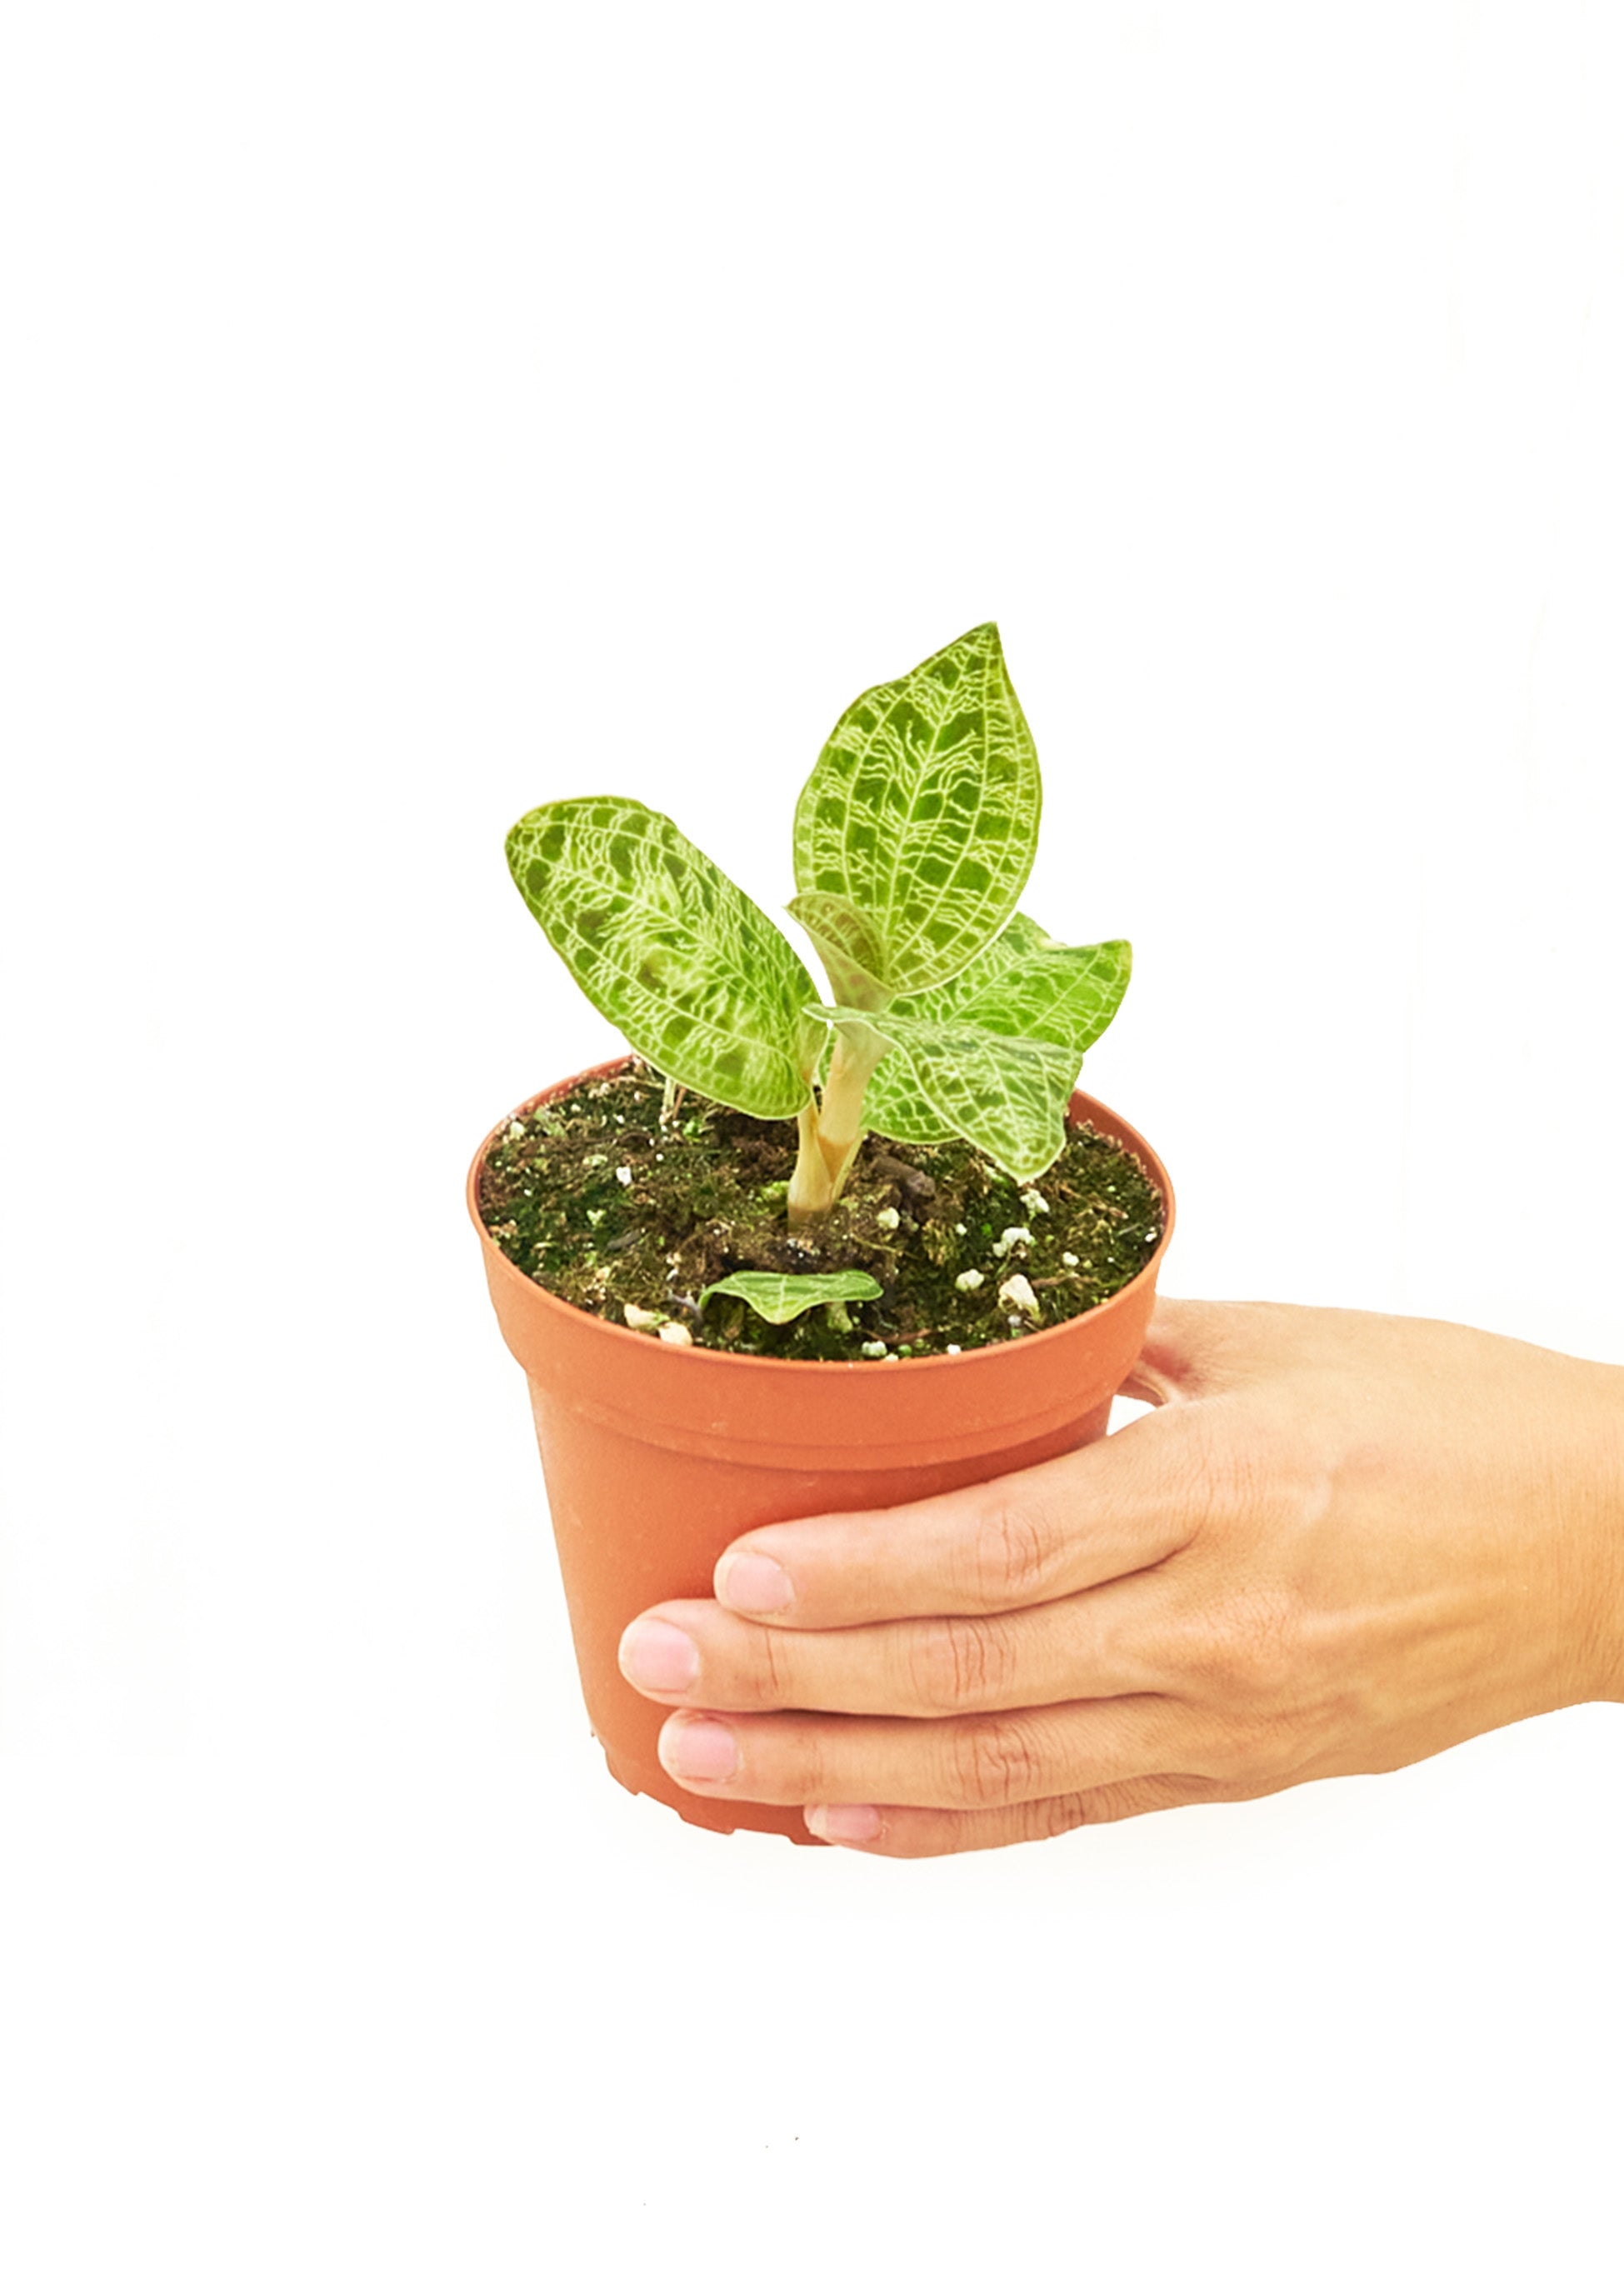 Small size Lightning Jewel Orchid in a growers pot with a white background with a hand holding the pot showing the top view